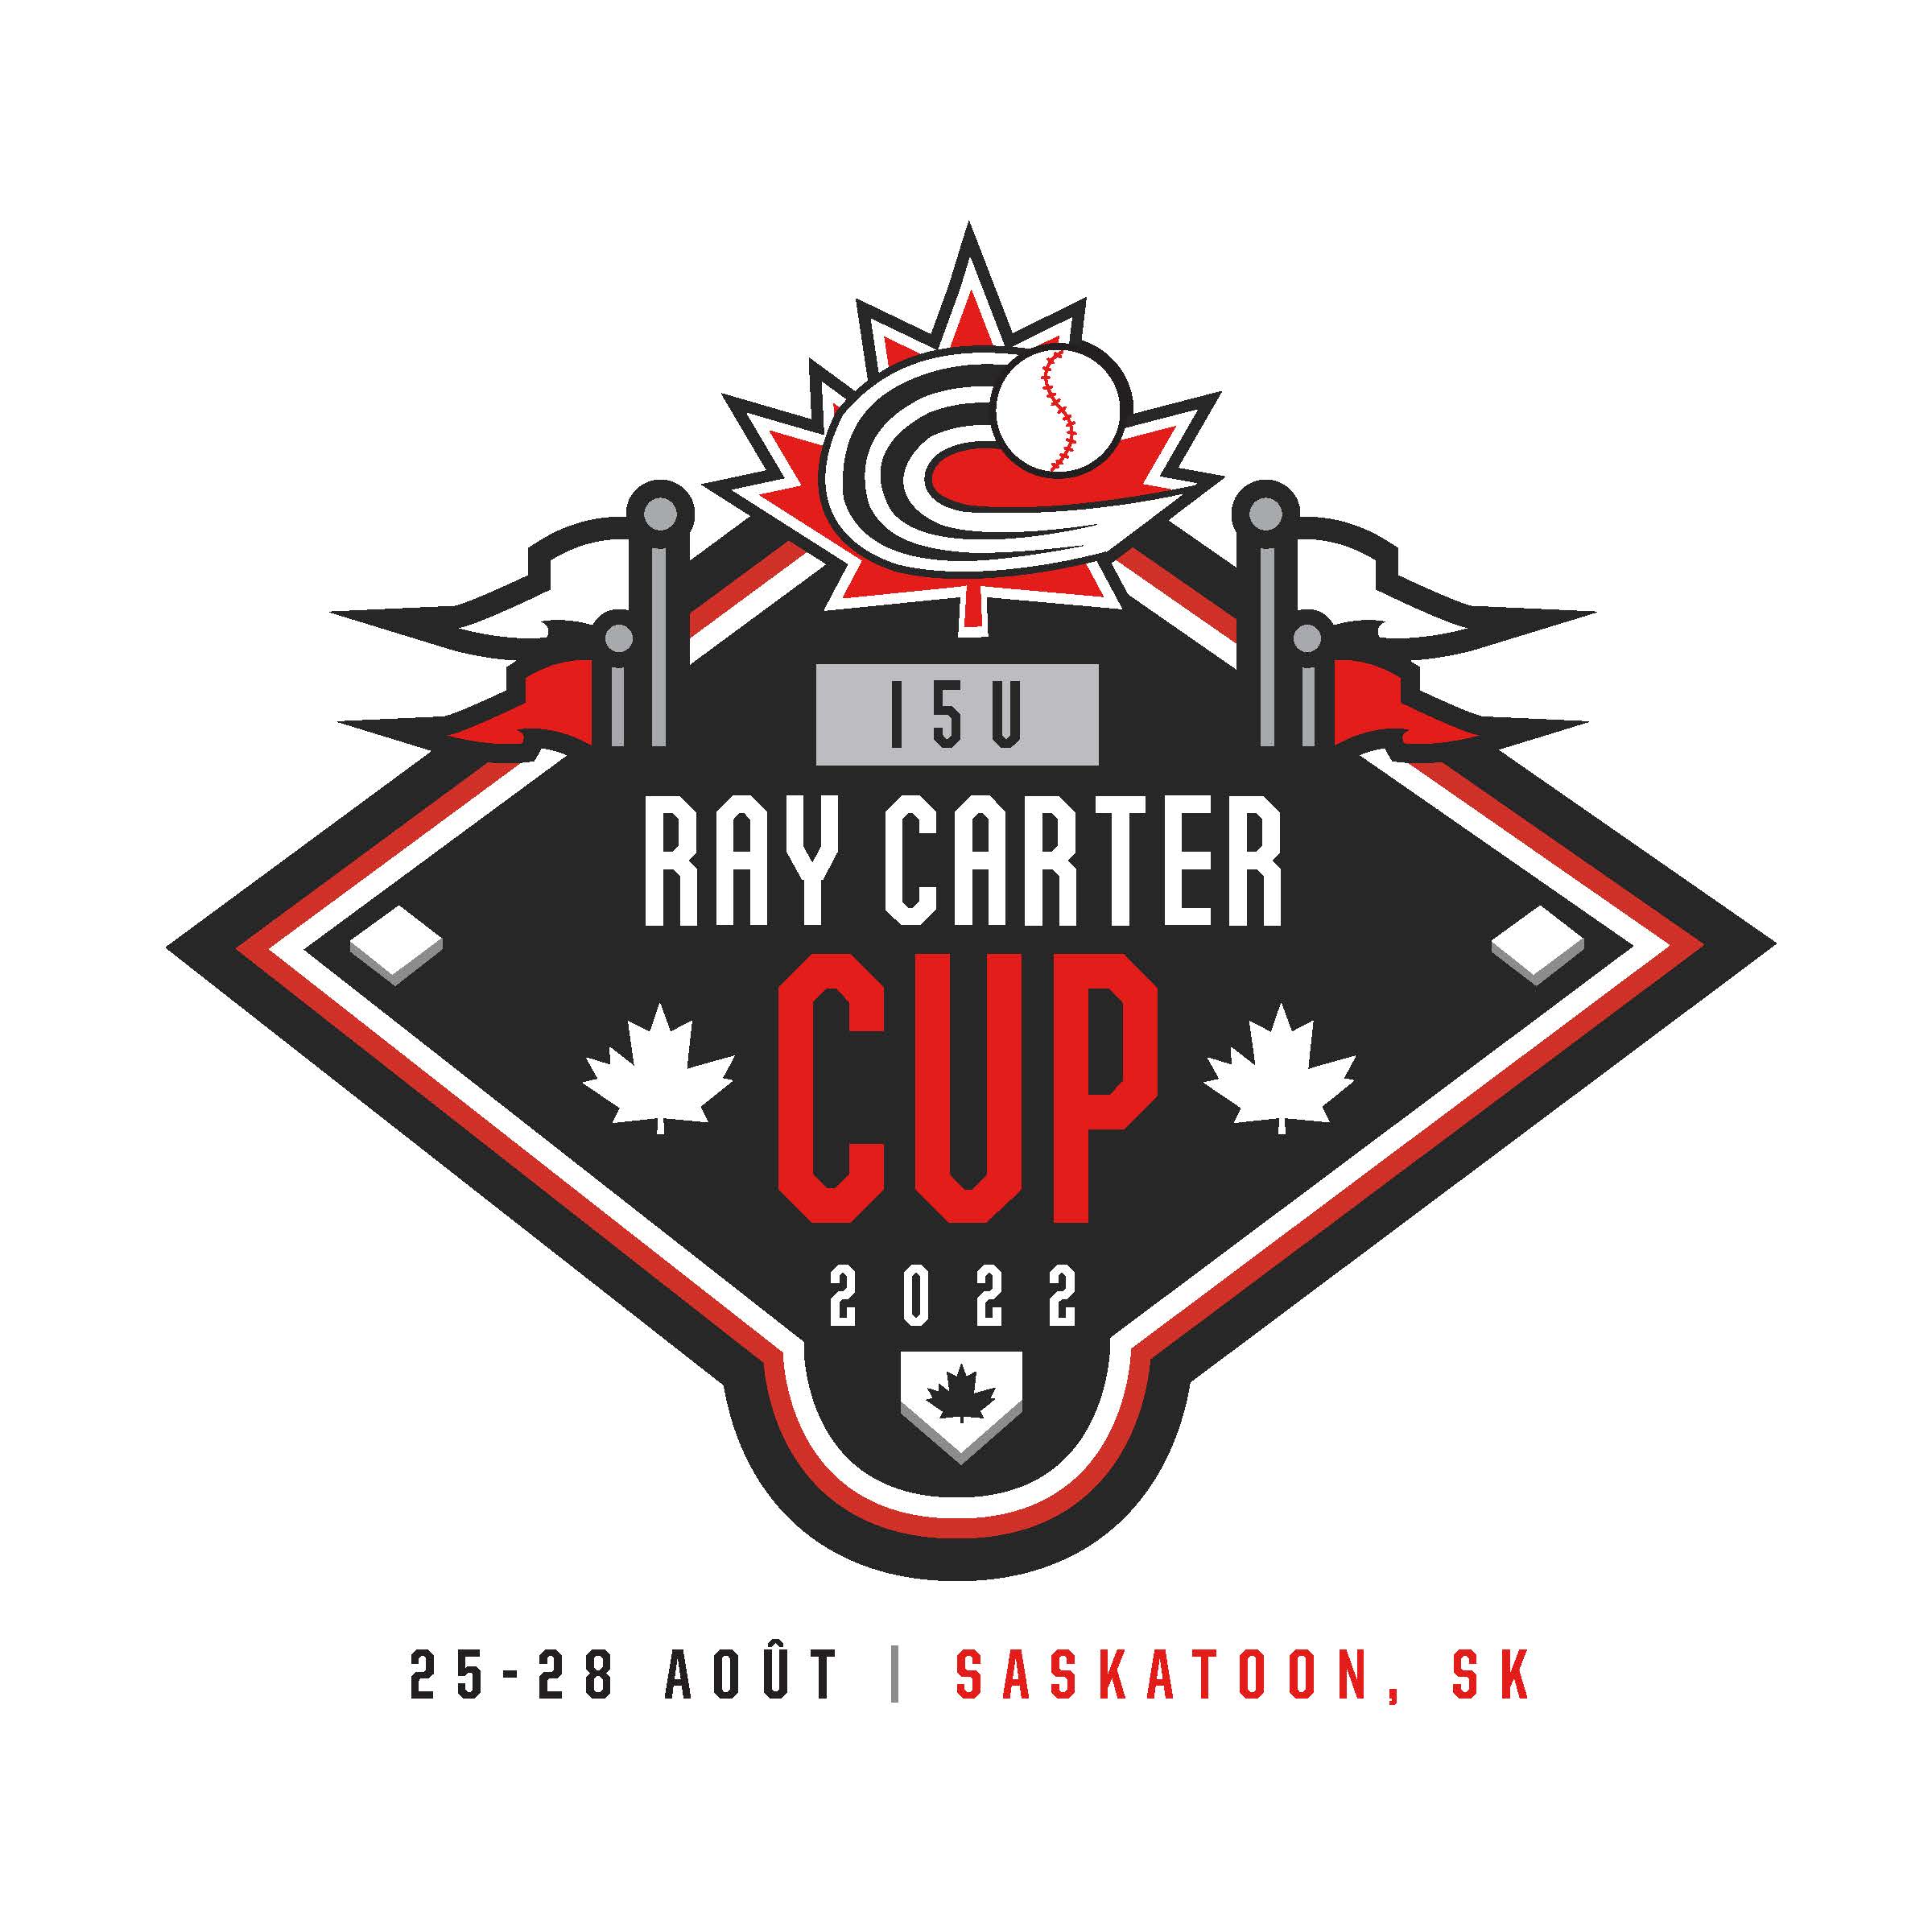 15U Elite Will Represent Ontario at Nationals-Ray Carter Cup!